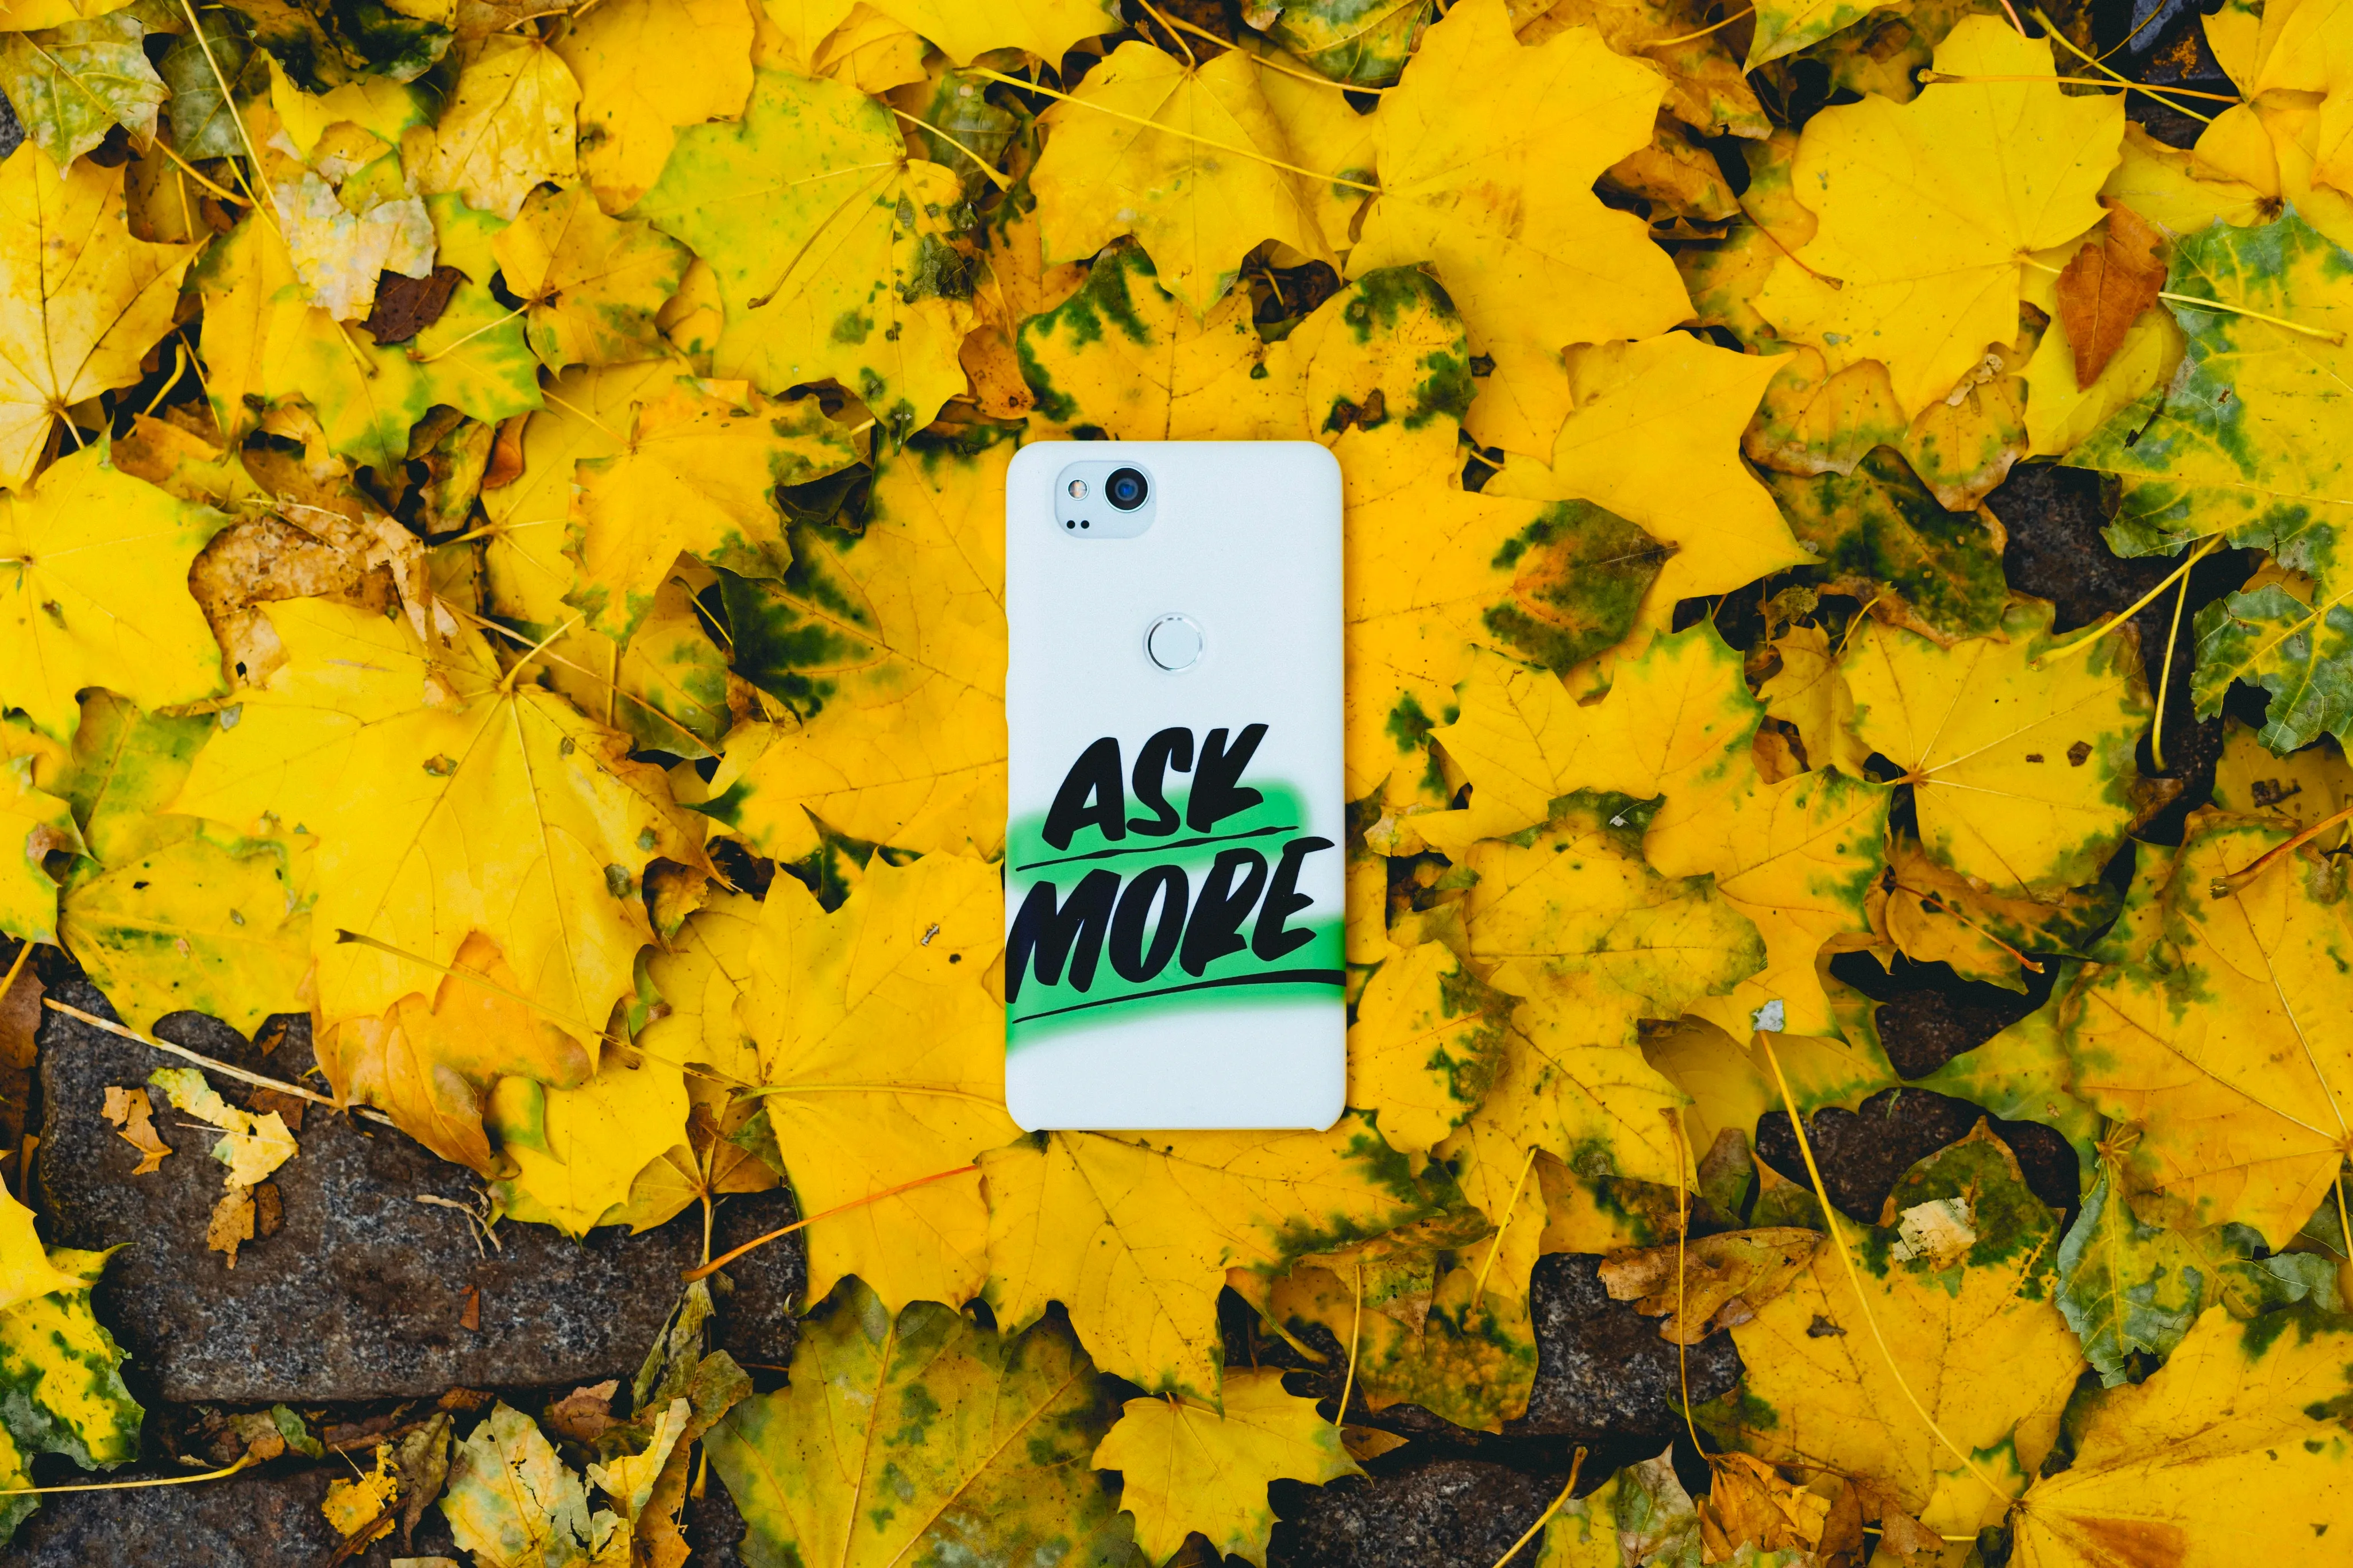 A smartphone with an "Ask More" case is lying on golden leafs.